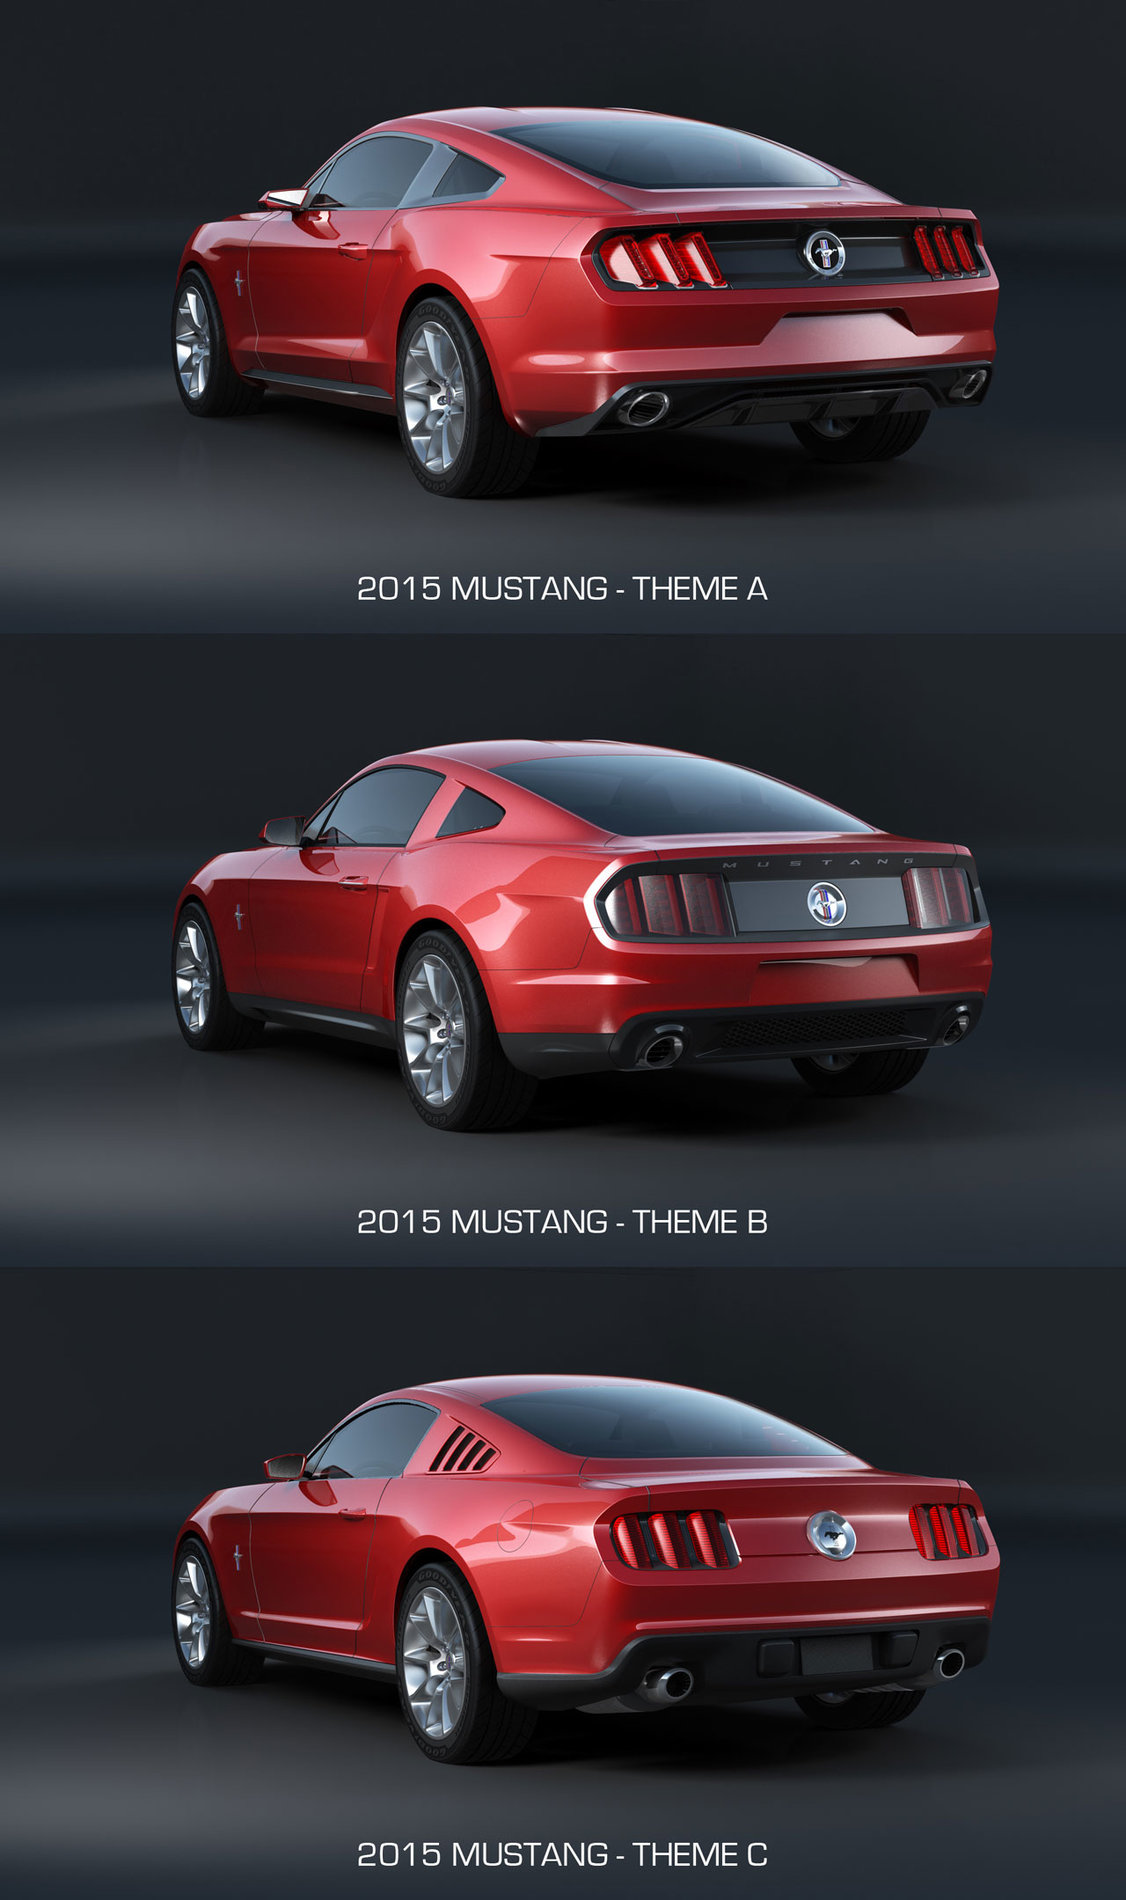 04-2015-Ford-Mustang-Design-Theme-Comparison-Rear-end.jpg